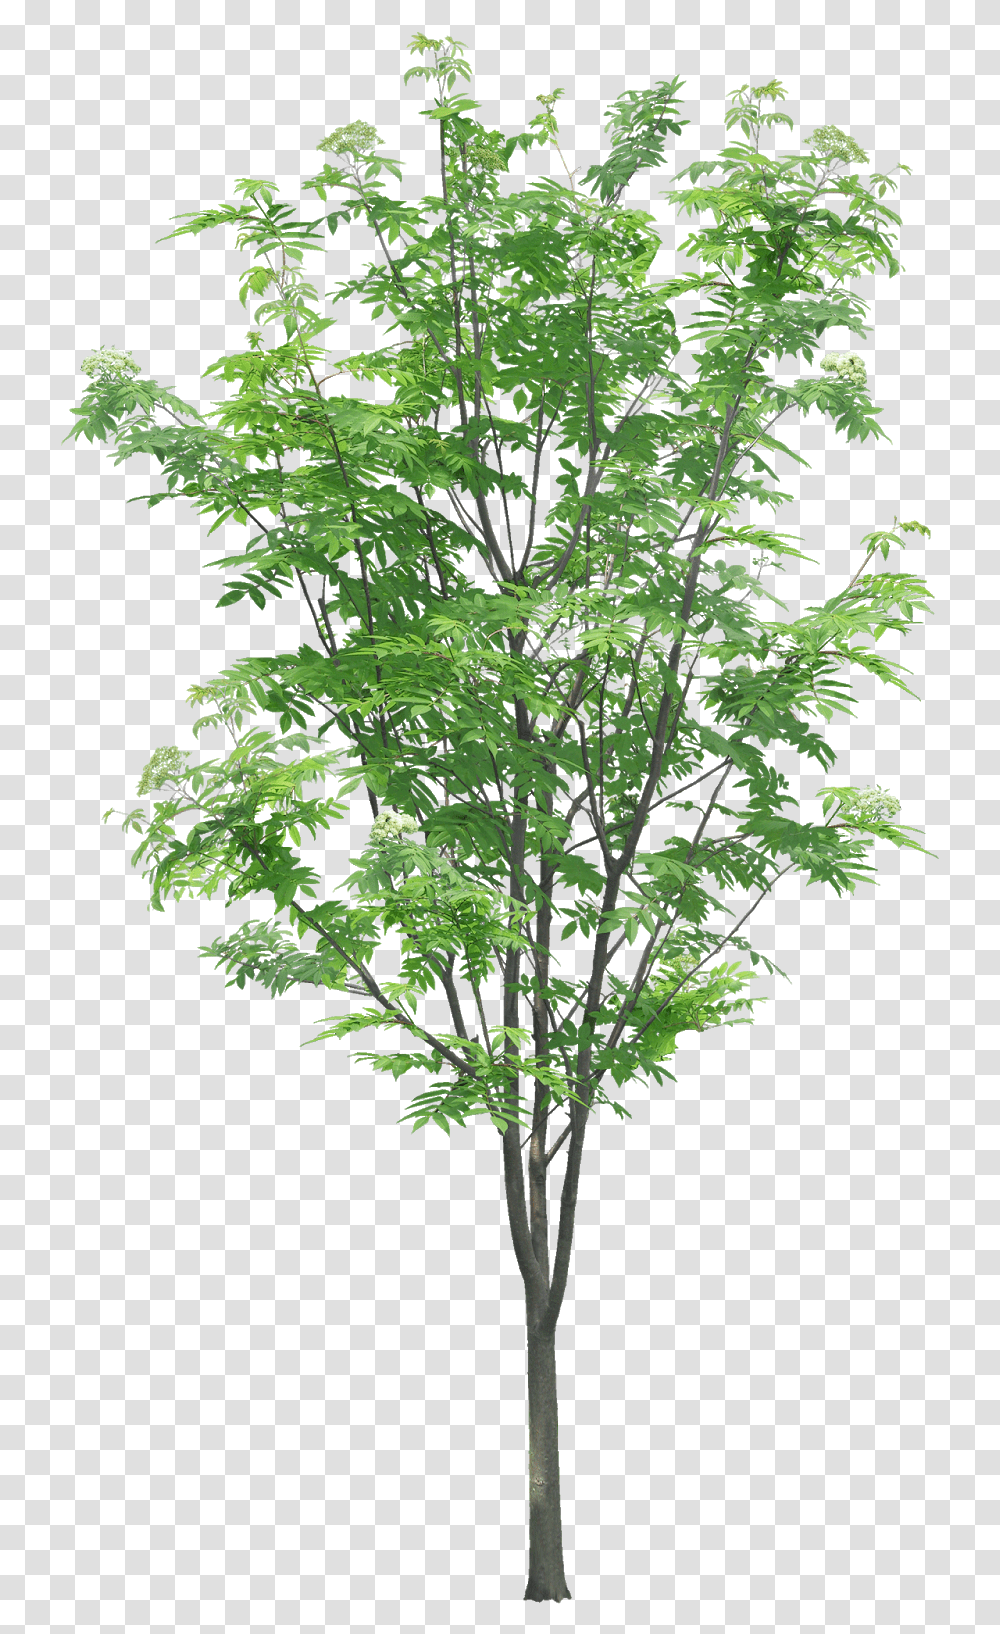 Download Hd Tree Branches Leaves Palm Autumn Tree Branch Texture, Plant, Maple, Leaf, Vegetation Transparent Png